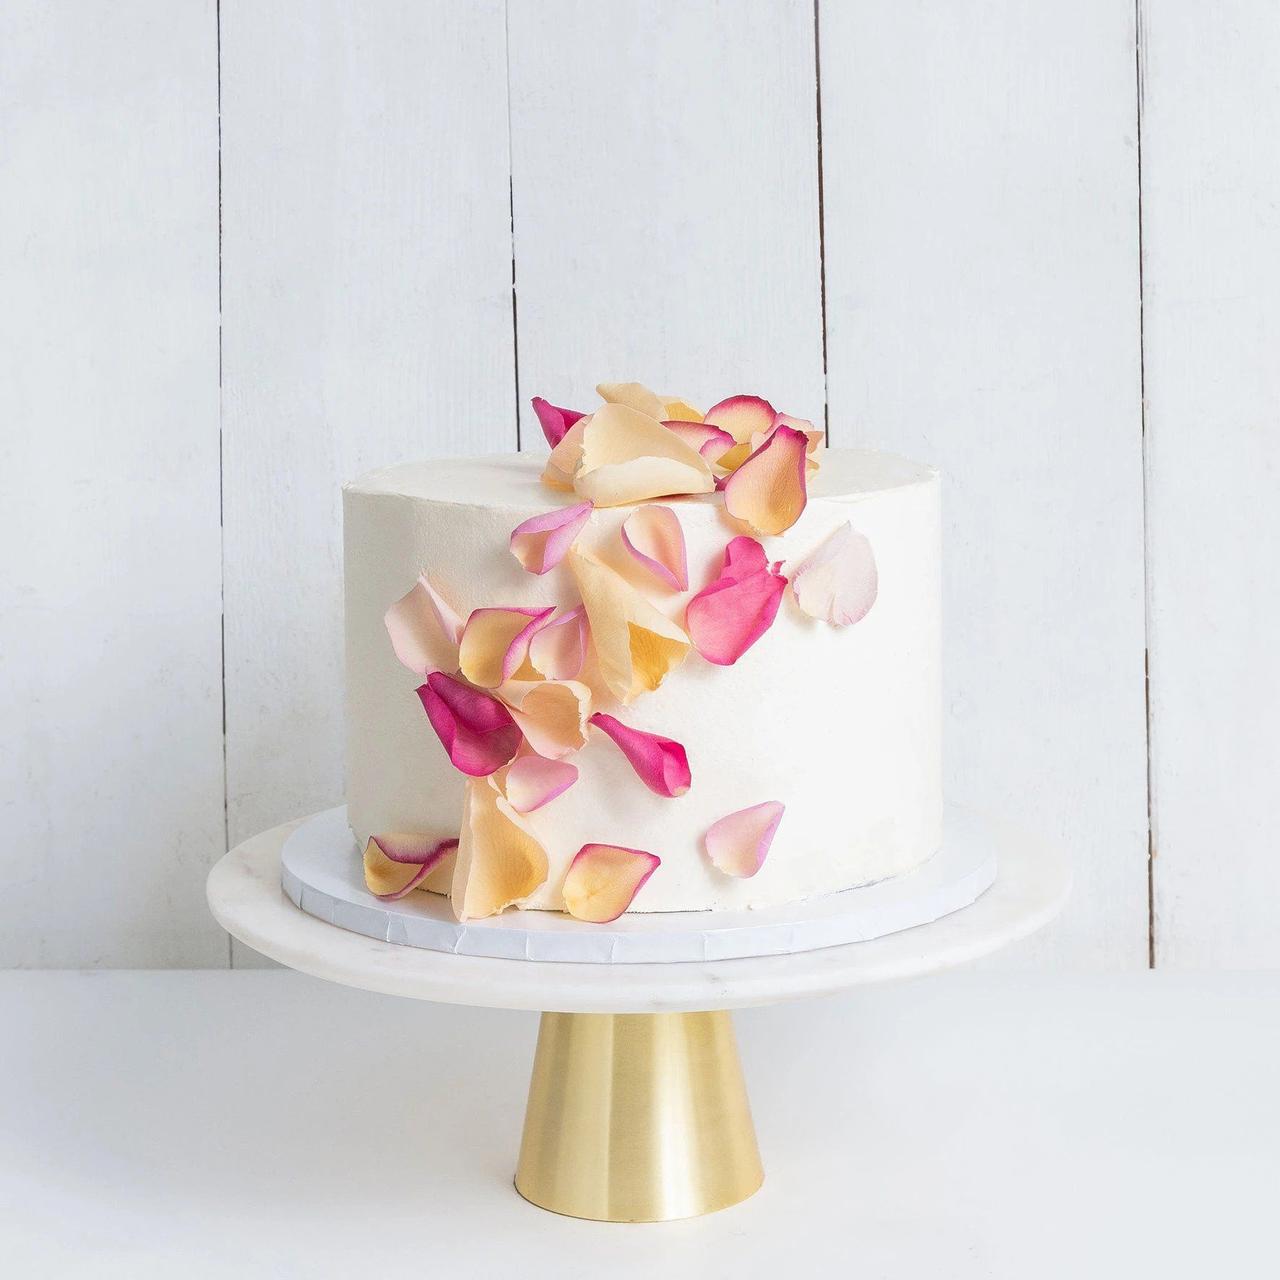 5 Non-Traditional Wedding Cakes That Will Wow Your Guests | Truly Engaging